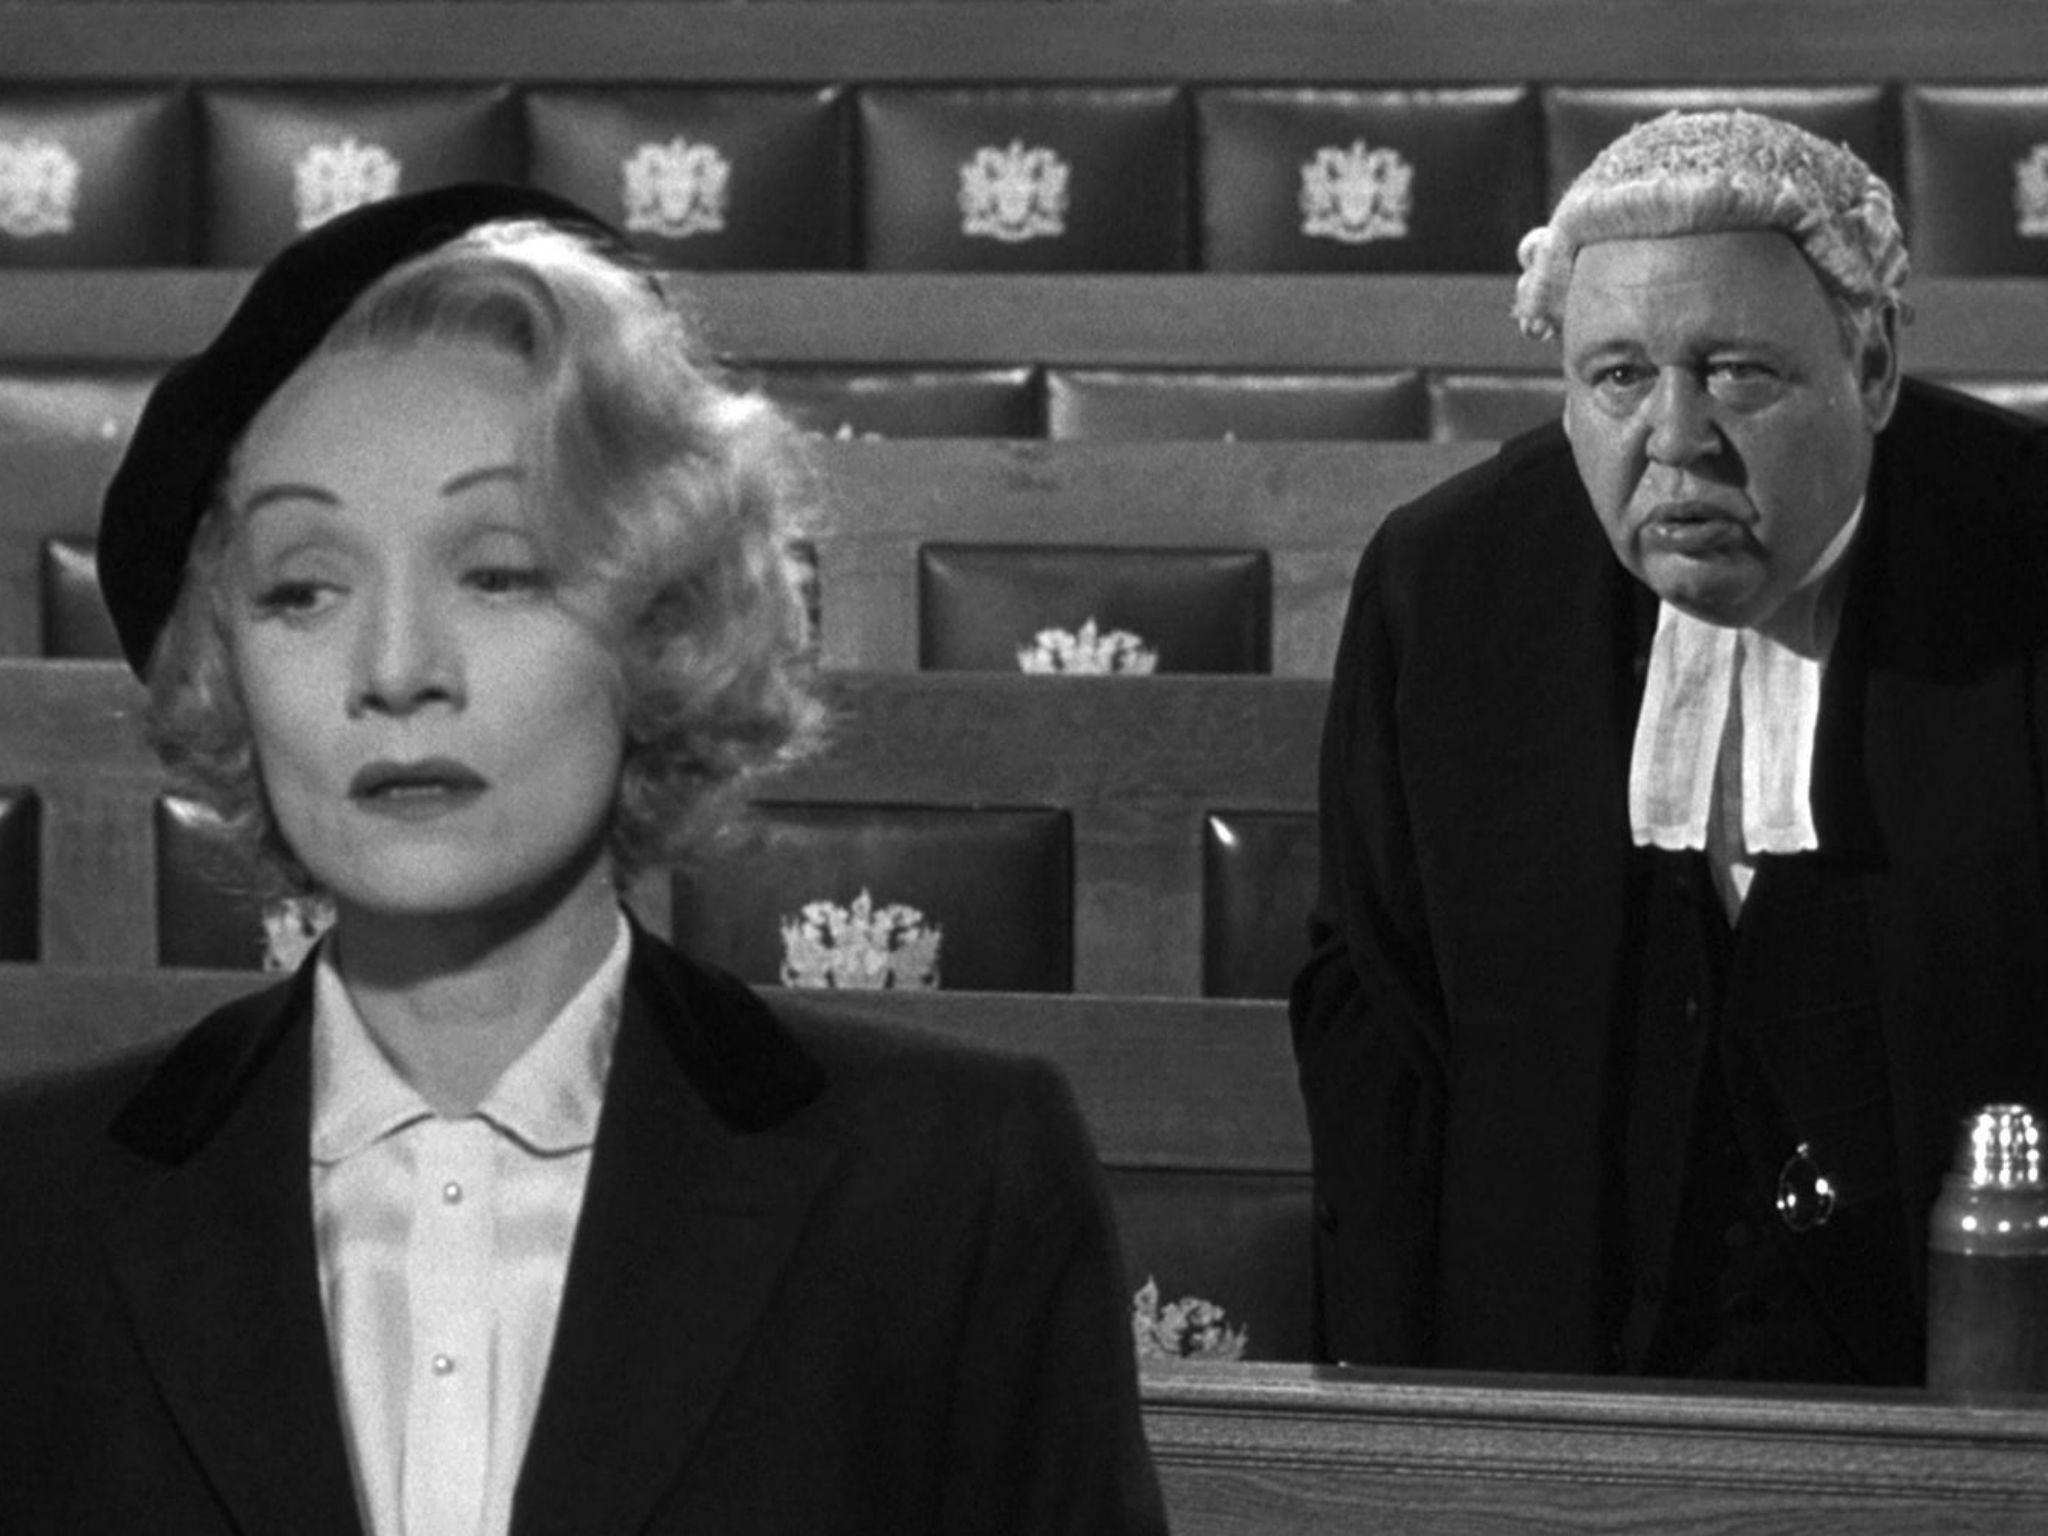 Witness for the Prosecution (1957) ORIGINAL TRAILER [HD 1080p]